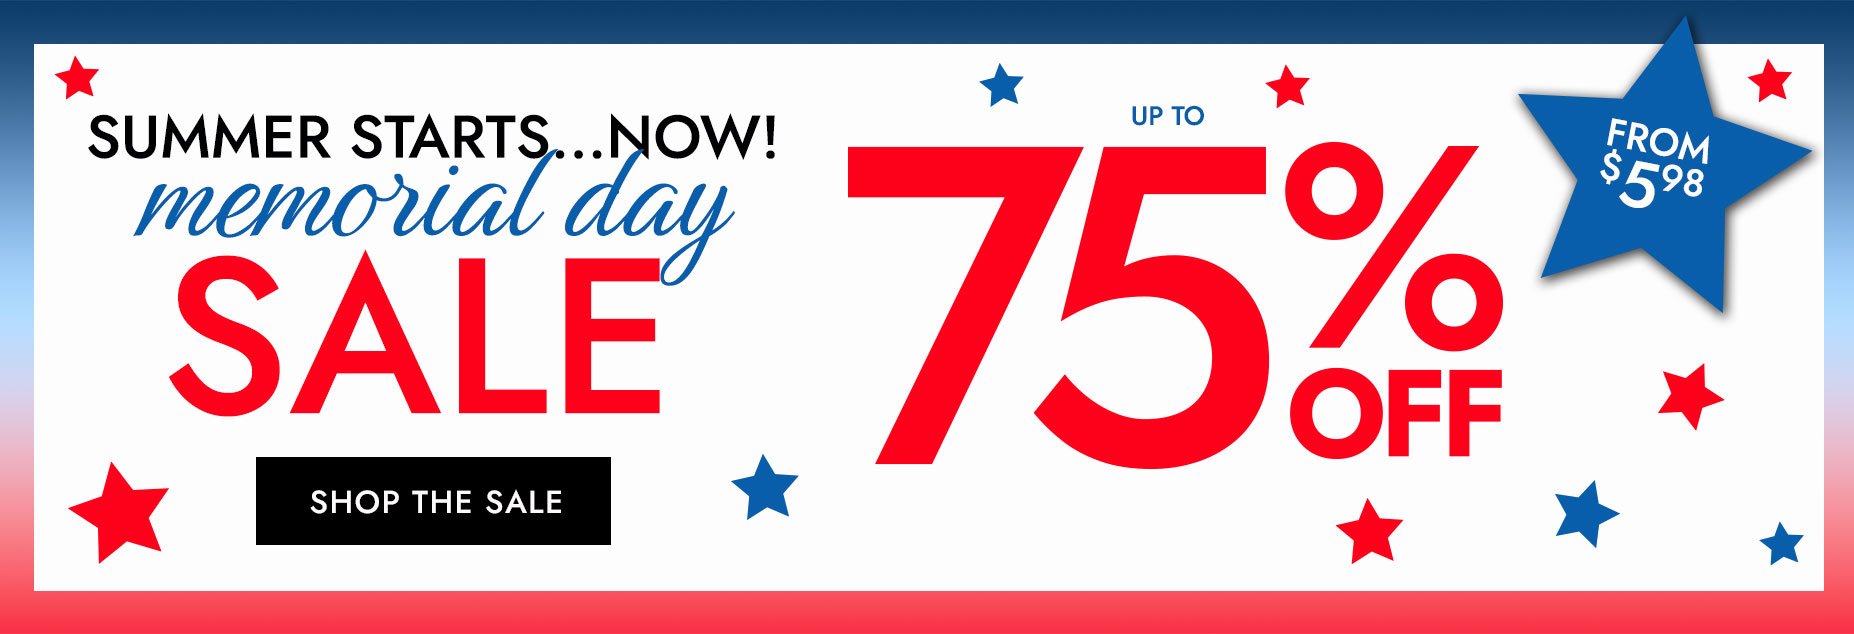 Memorial Day sale up to 75% off